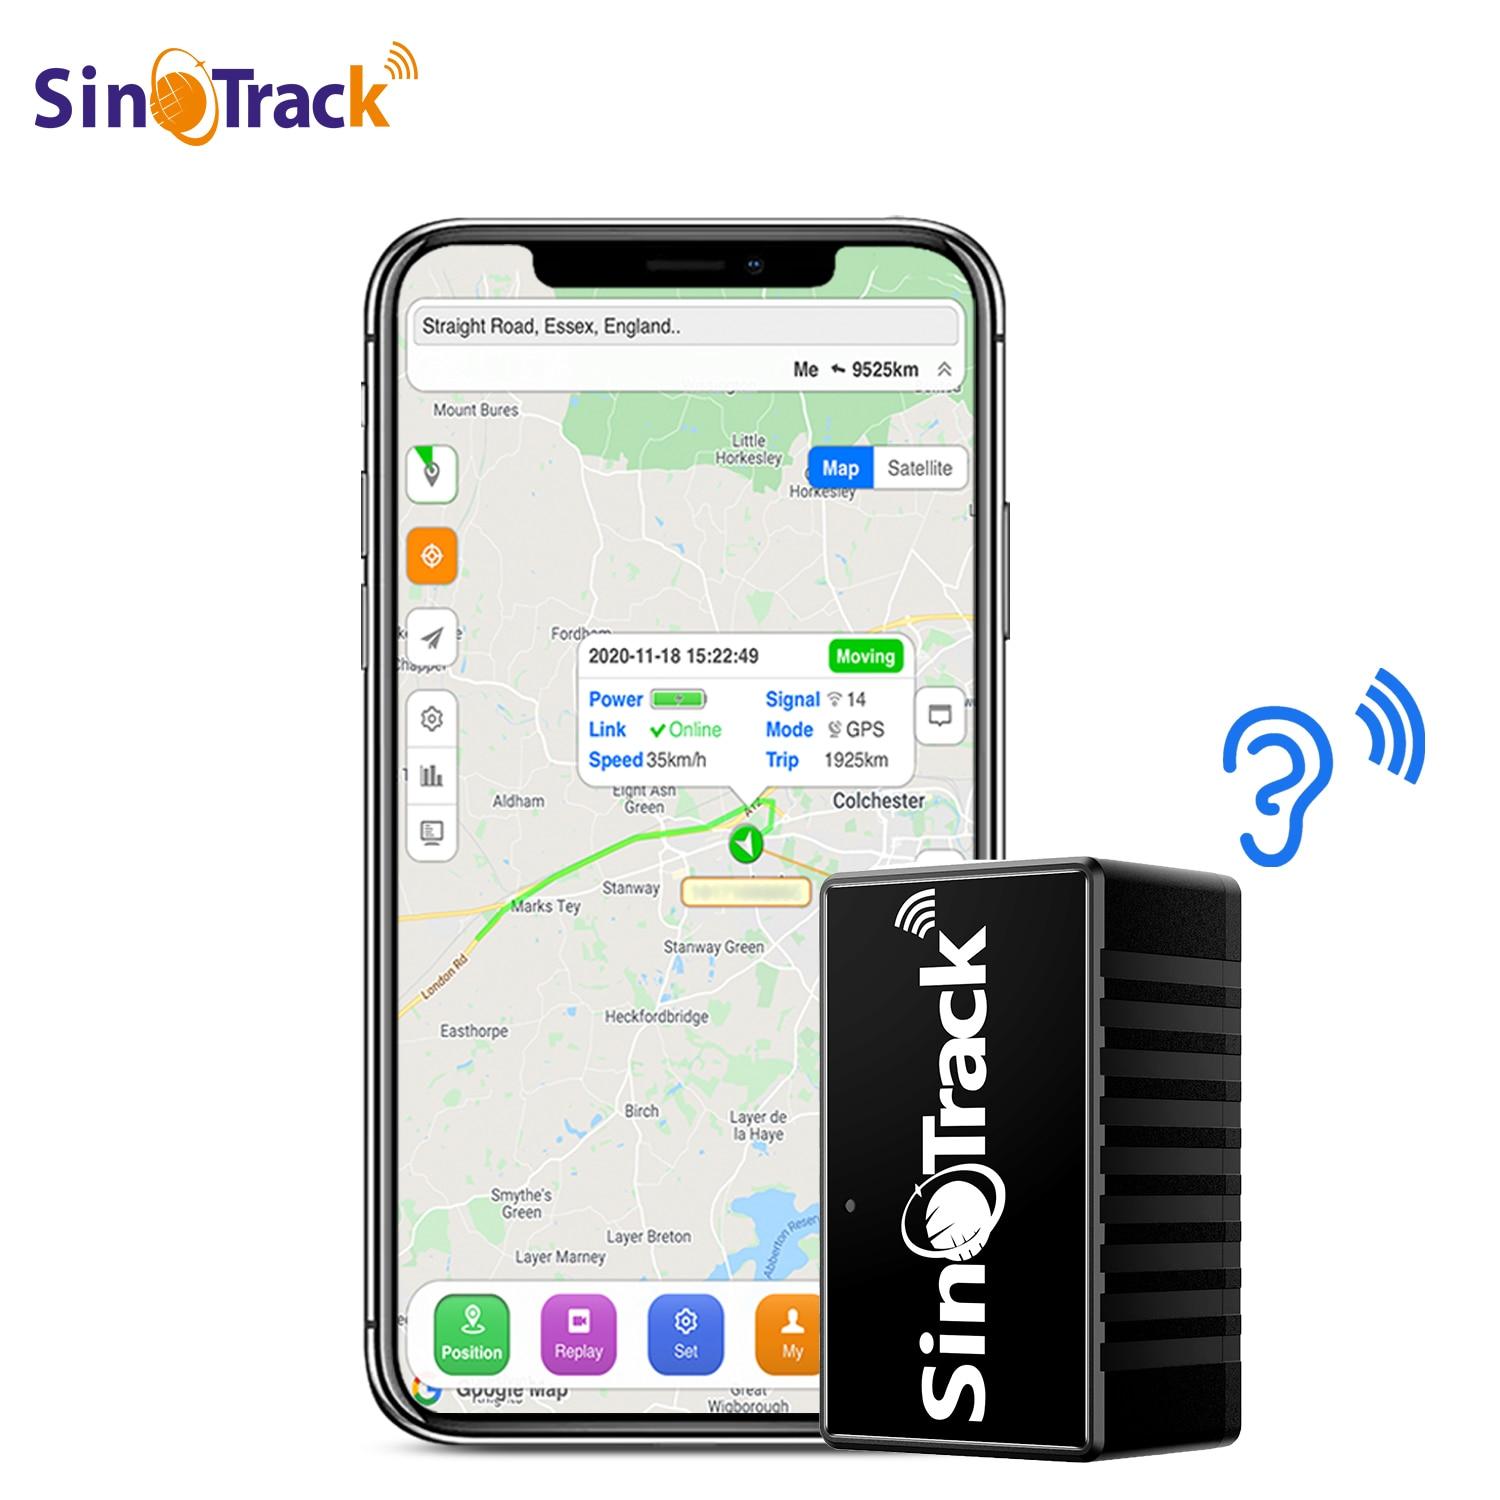 Mini-Builtin-Battery-GSM-GPS-tracker-ST-903-for-Car-Kids-Personal-Voice-Monitor-Pet-track.jpg